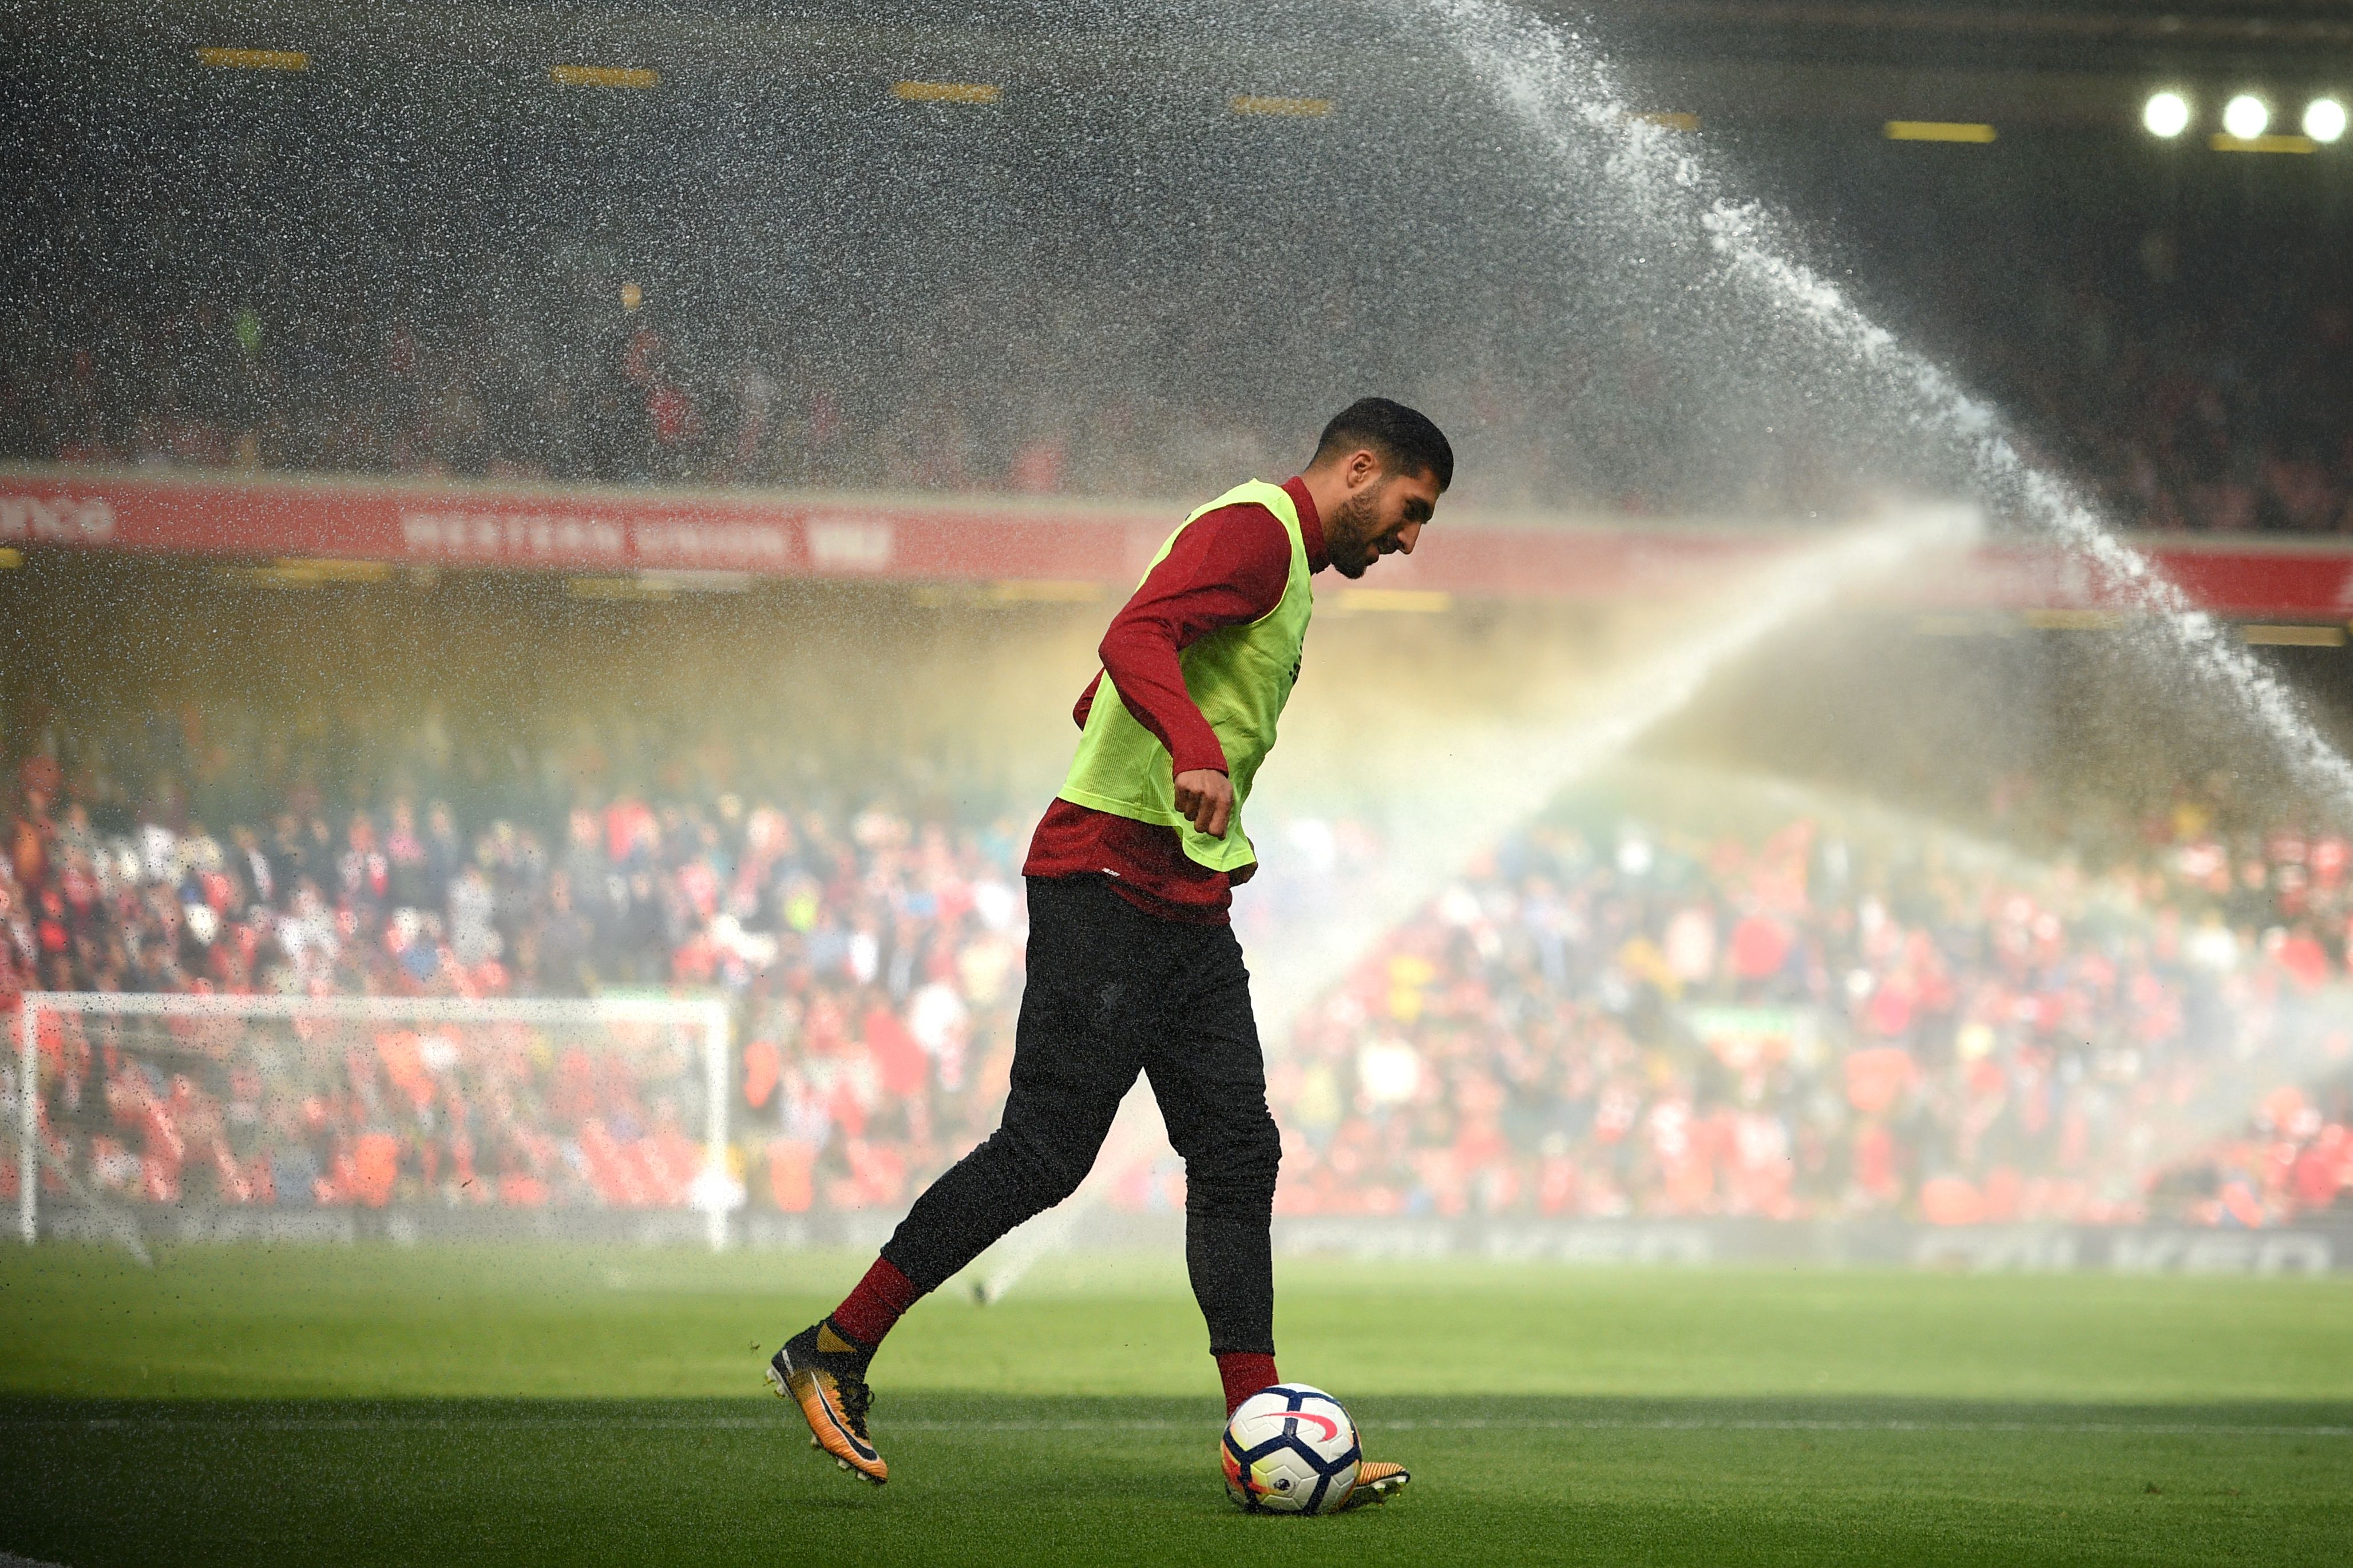 Liverpool's German midfielder Emre Can warms up as the pitch is watered at half time in the English Premier League football match between Liverpool and Crystal Palace at Anfield in Liverpool, north west England on August 19, 2017. / AFP PHOTO / Oli SCARFF / RESTRICTED TO EDITORIAL USE. No use with unauthorized audio, video, data, fixture lists, club/league logos or 'live' services. Online in-match use limited to 75 images, no video emulation. No use in betting, games or single club/league/player publications.  /         (Photo credit should read OLI SCARFF/AFP/Getty Images)